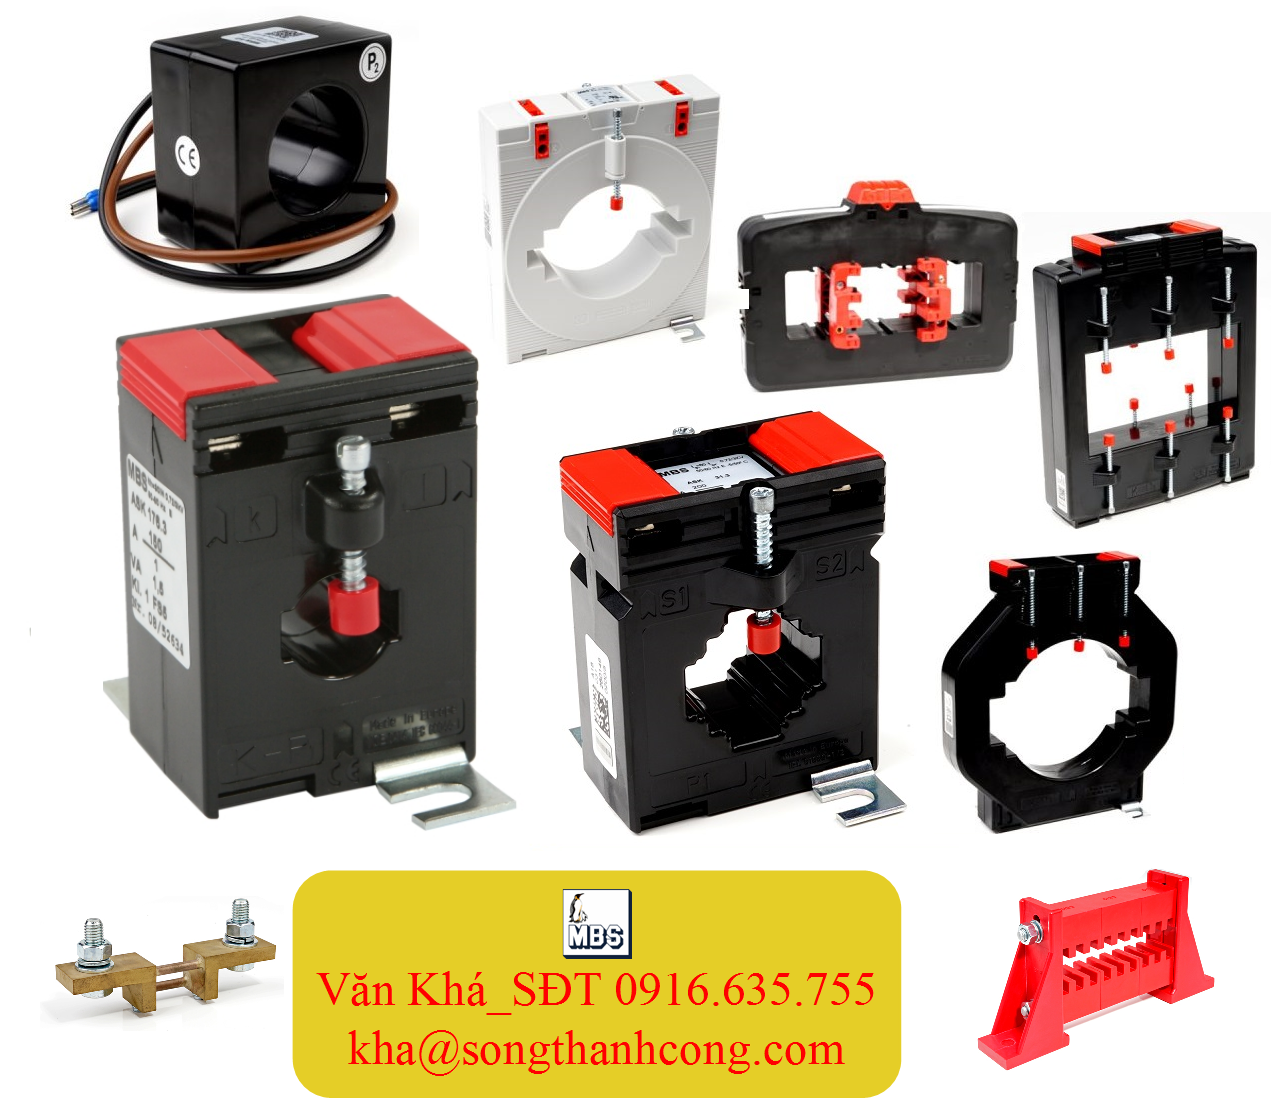 ct-ask-176-3-current-transformer-day-do-75-250-a-xuat-xu-germany-stc-viet-nam-1.png